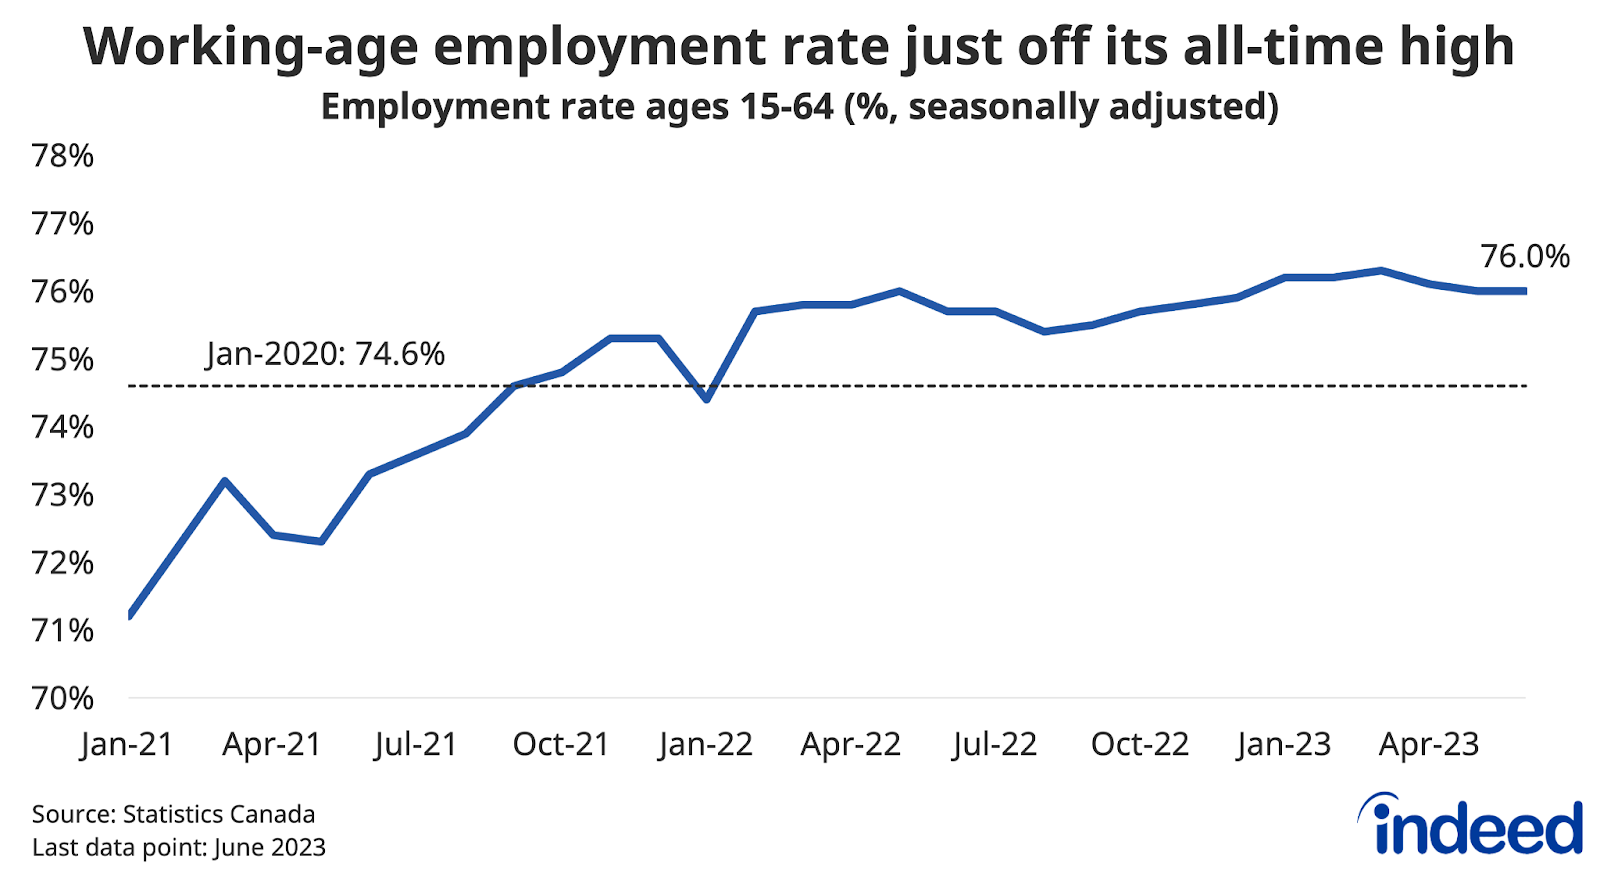 Line graph titled “Working-age employment rate just off its all-time high” shows the share of Canadians aged 15-64 with a job between January 2021 and June 2023. The working-age employment rate ticked down 0.3 percentage points in the second quarter to 76.0% from an all-time high in March, but still matched its previous high reached in 2022.